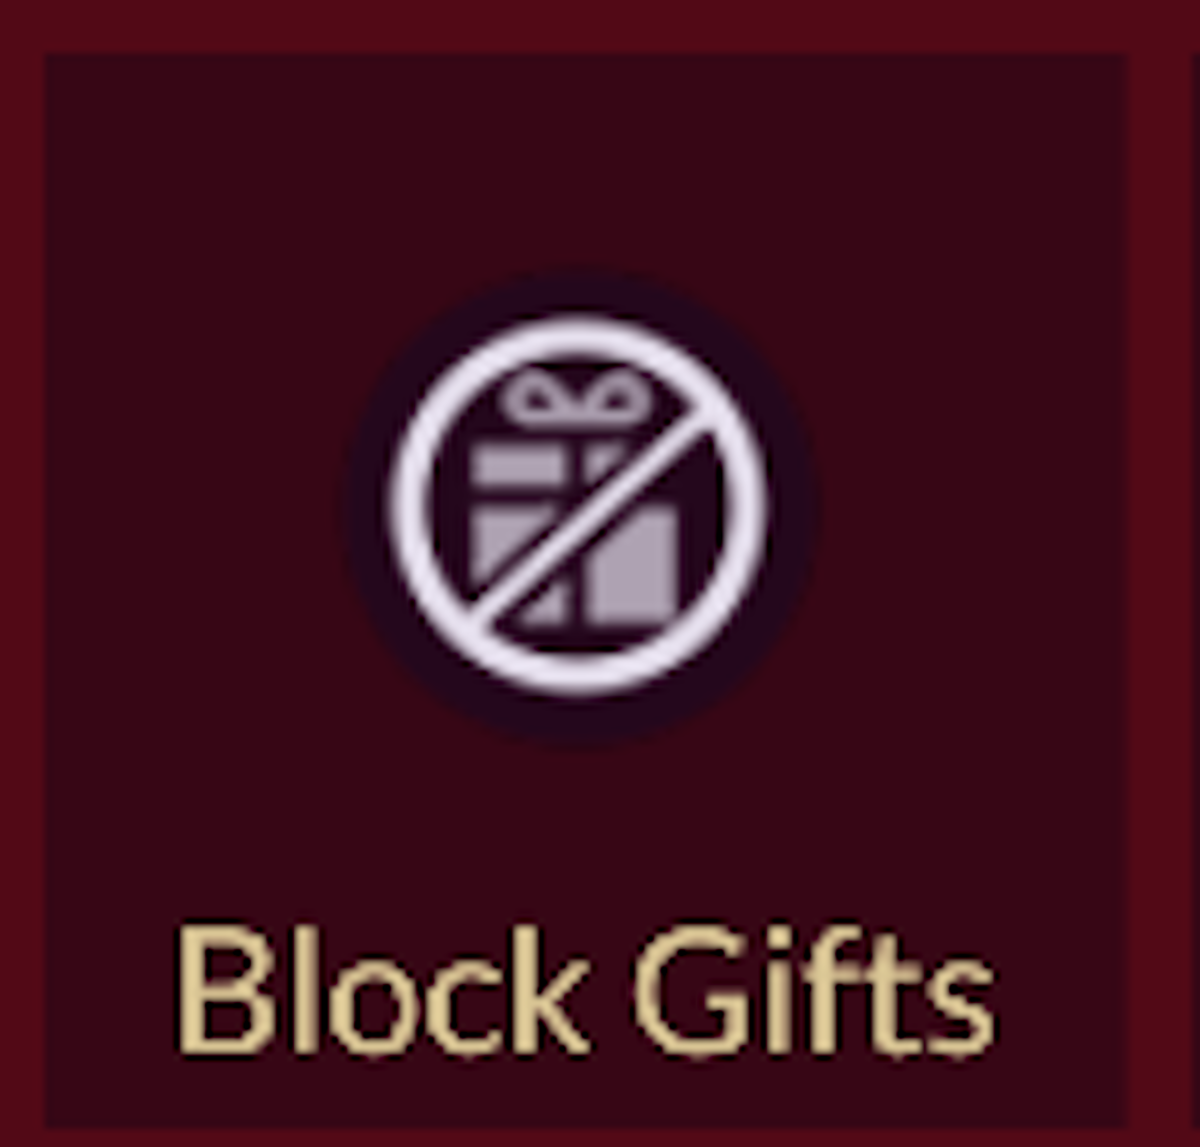 The Zynga Poker block gifts table item.